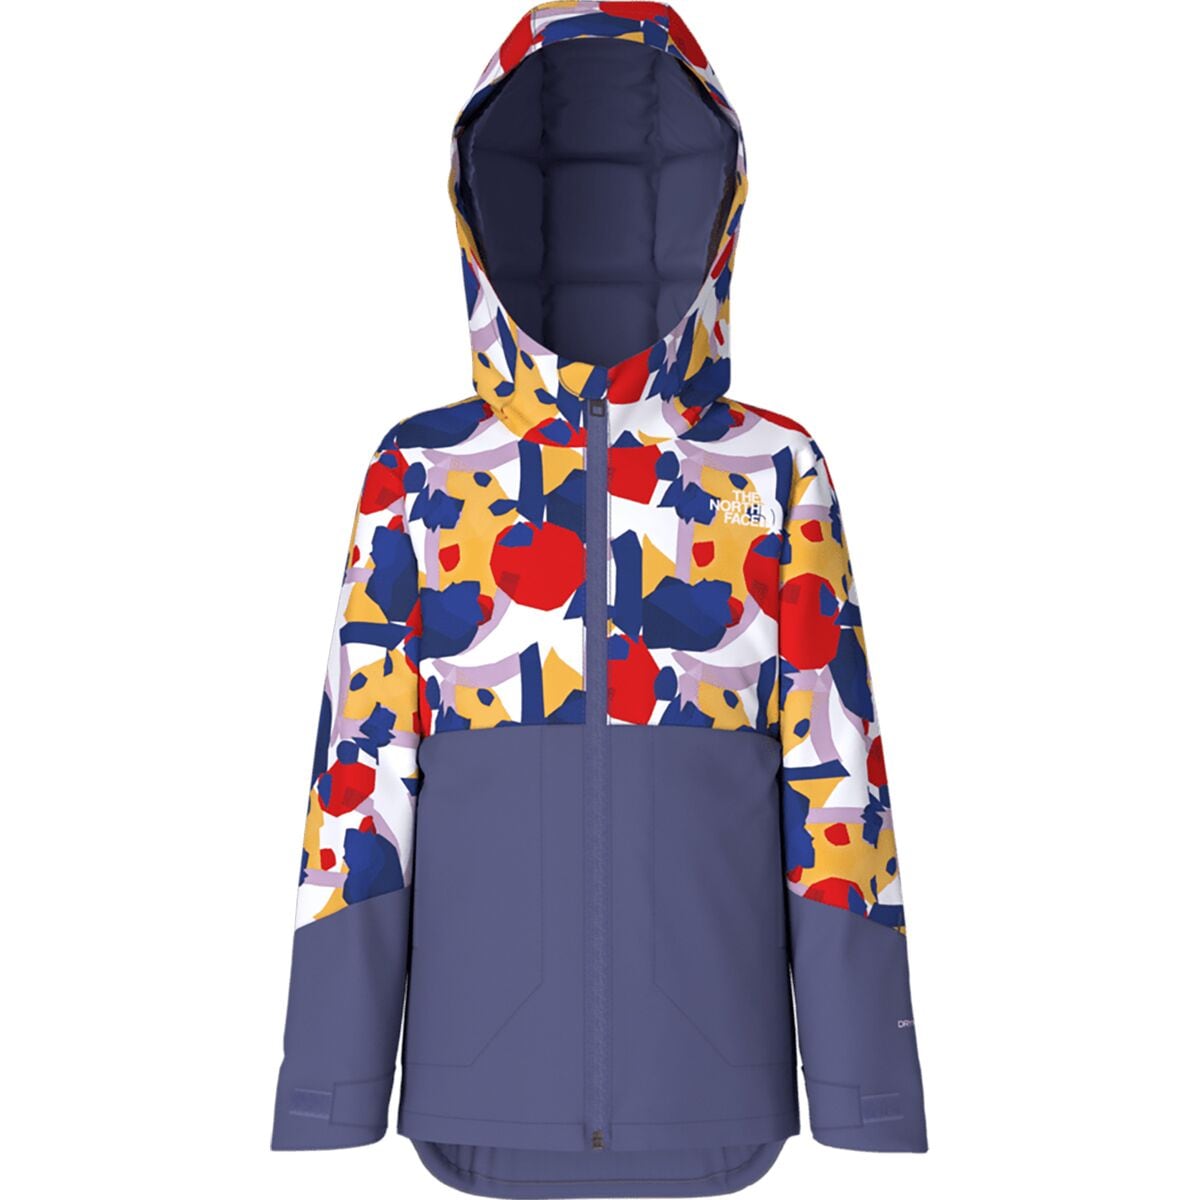 The North Face Freedom Insulated Jacket - Toddlers'